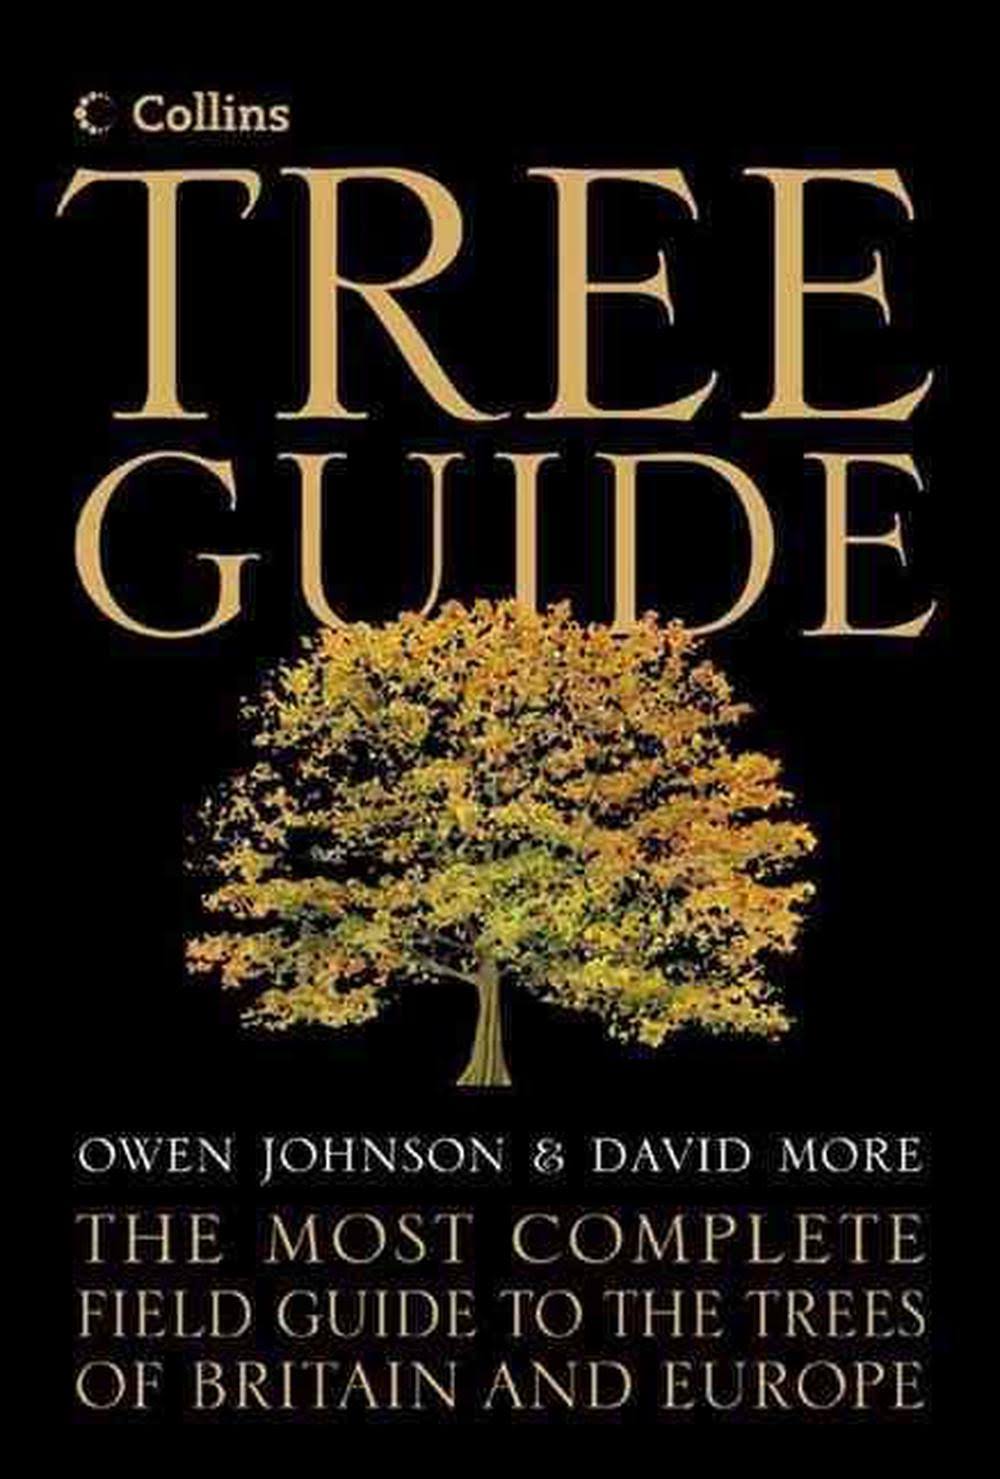 Collins Tree Guide [Book]